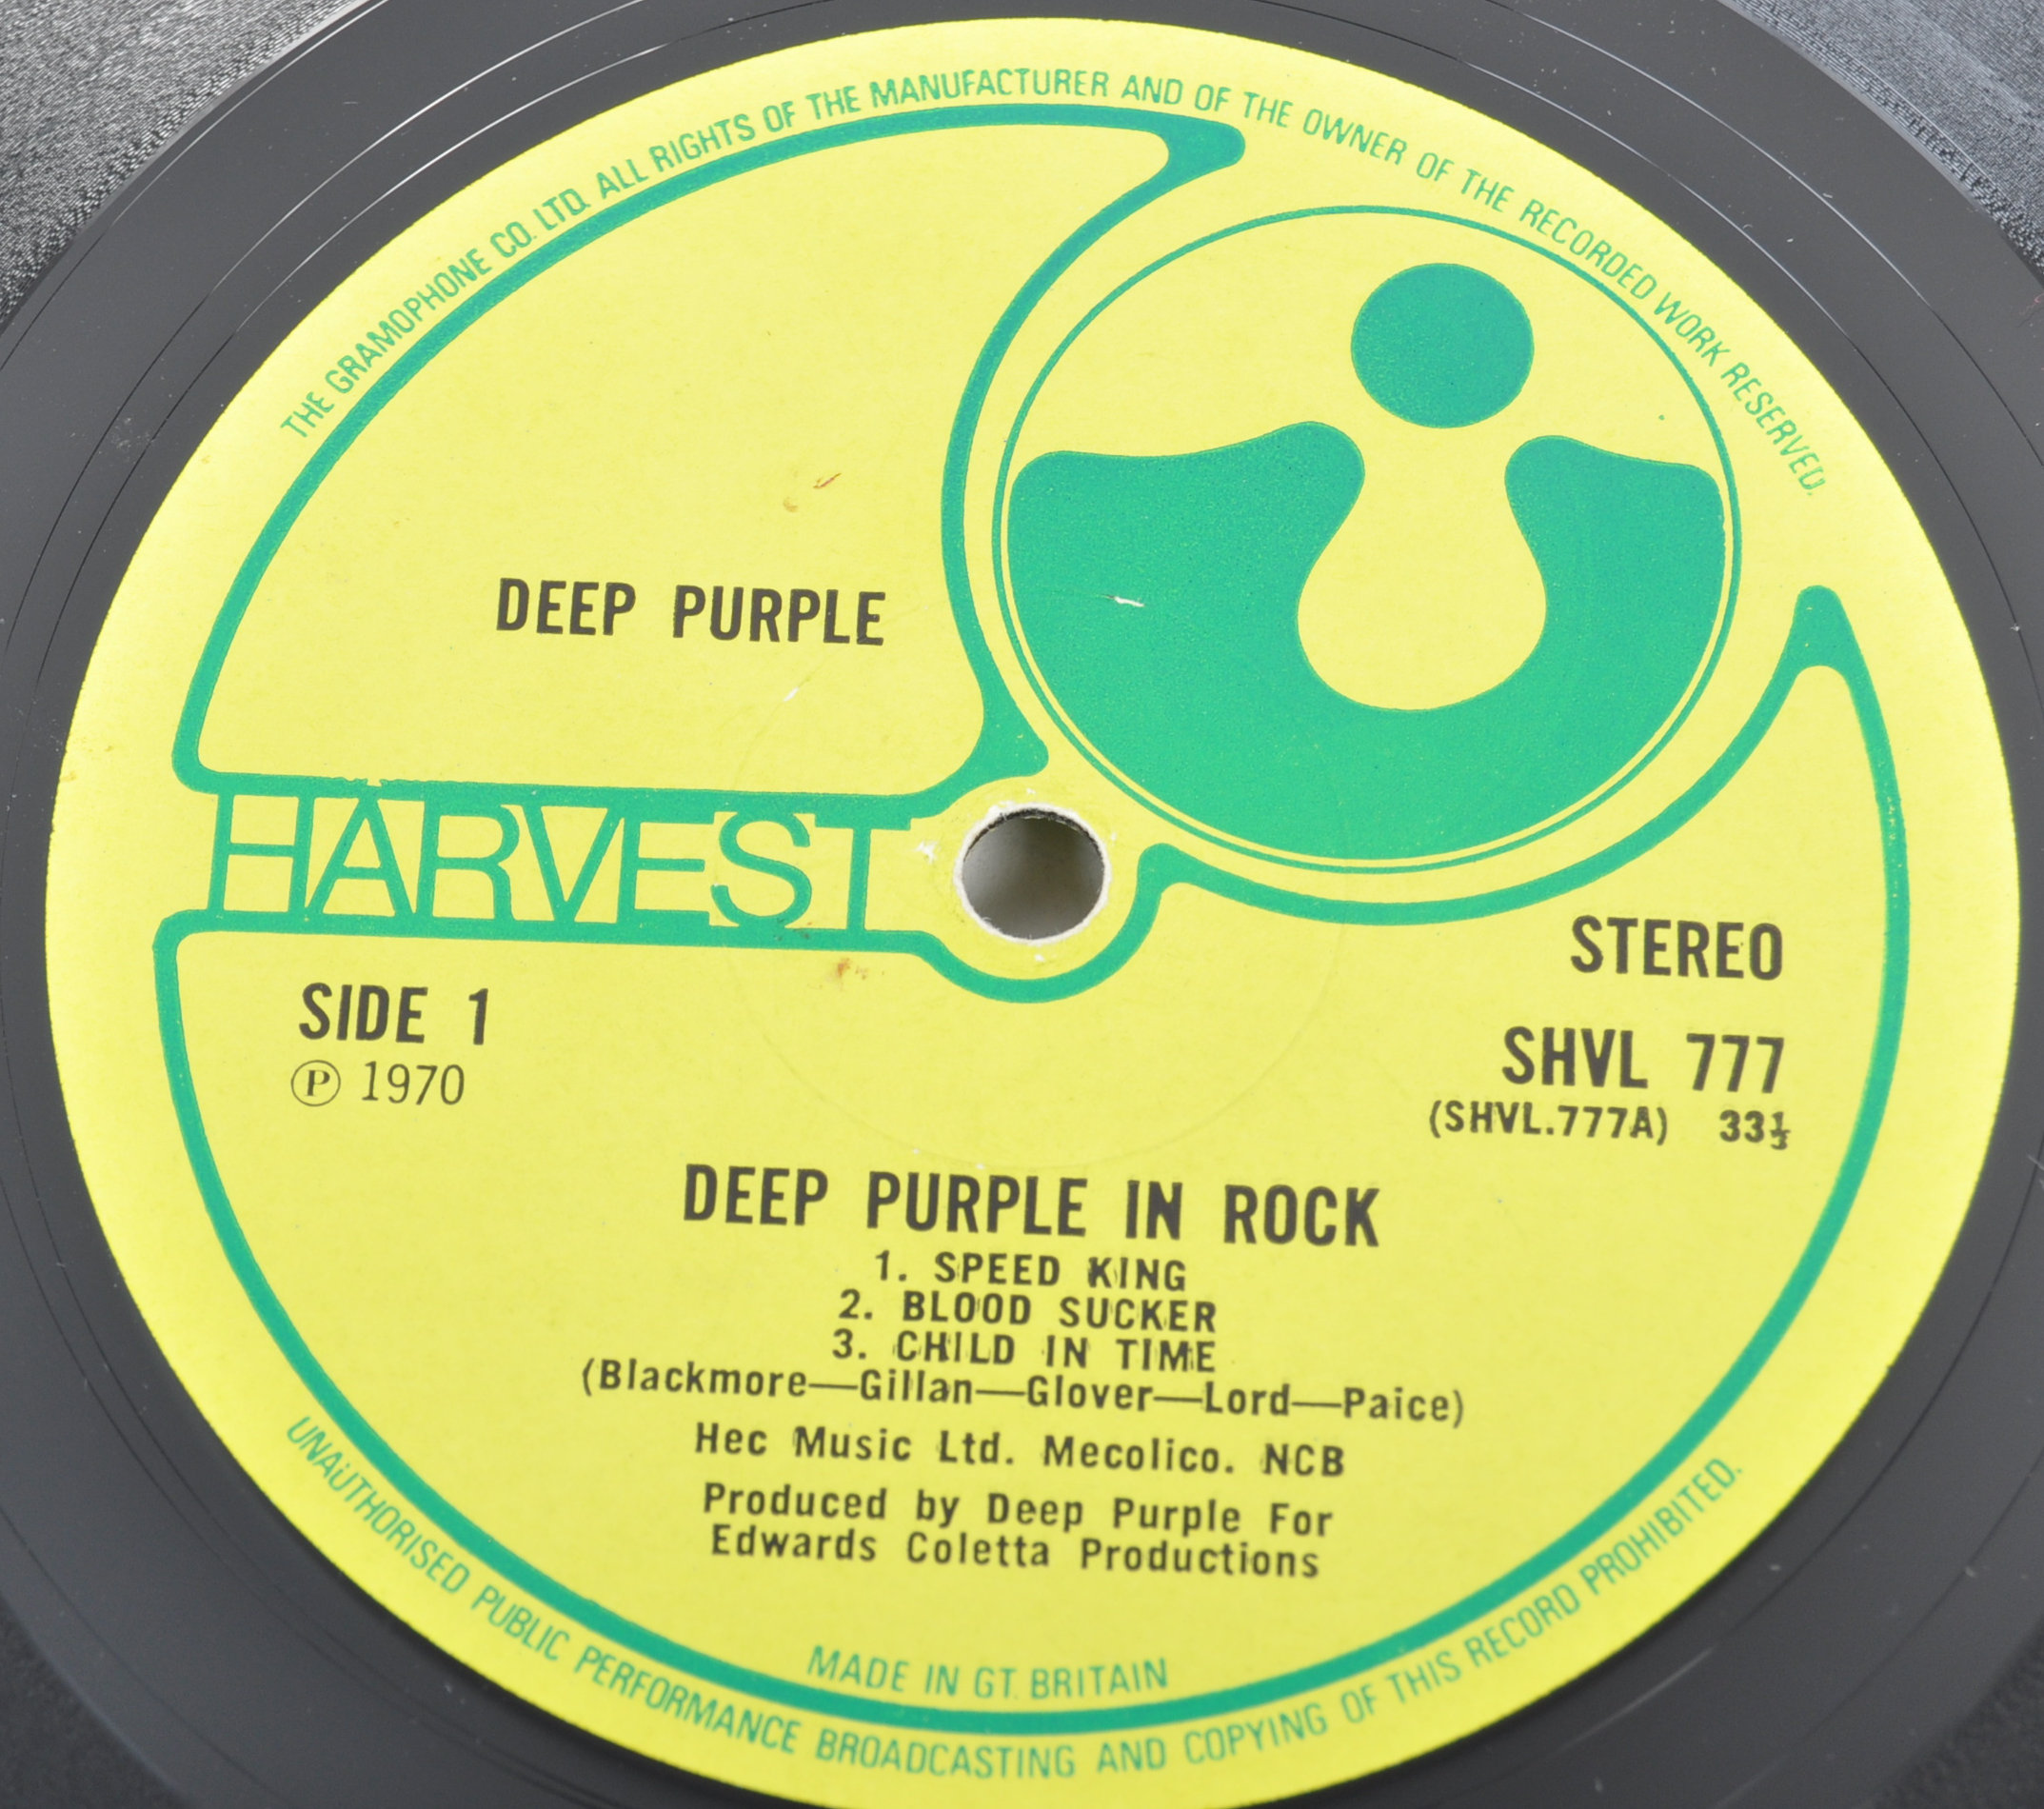 DEEP PURPLE - TWO VINYL RECORD ALBUMS - IN ROCK AND LIVE AT THE ROYAL ALBERT HALL - Image 2 of 4